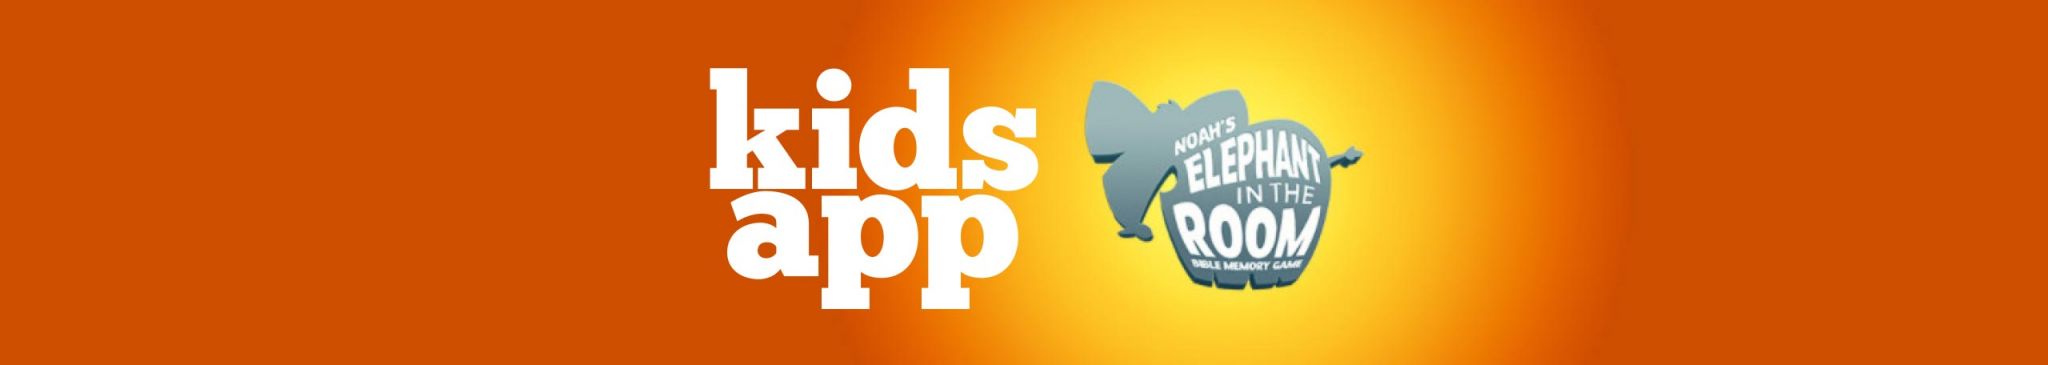 Kids Bible teaching apps by Back to the Bible Kids